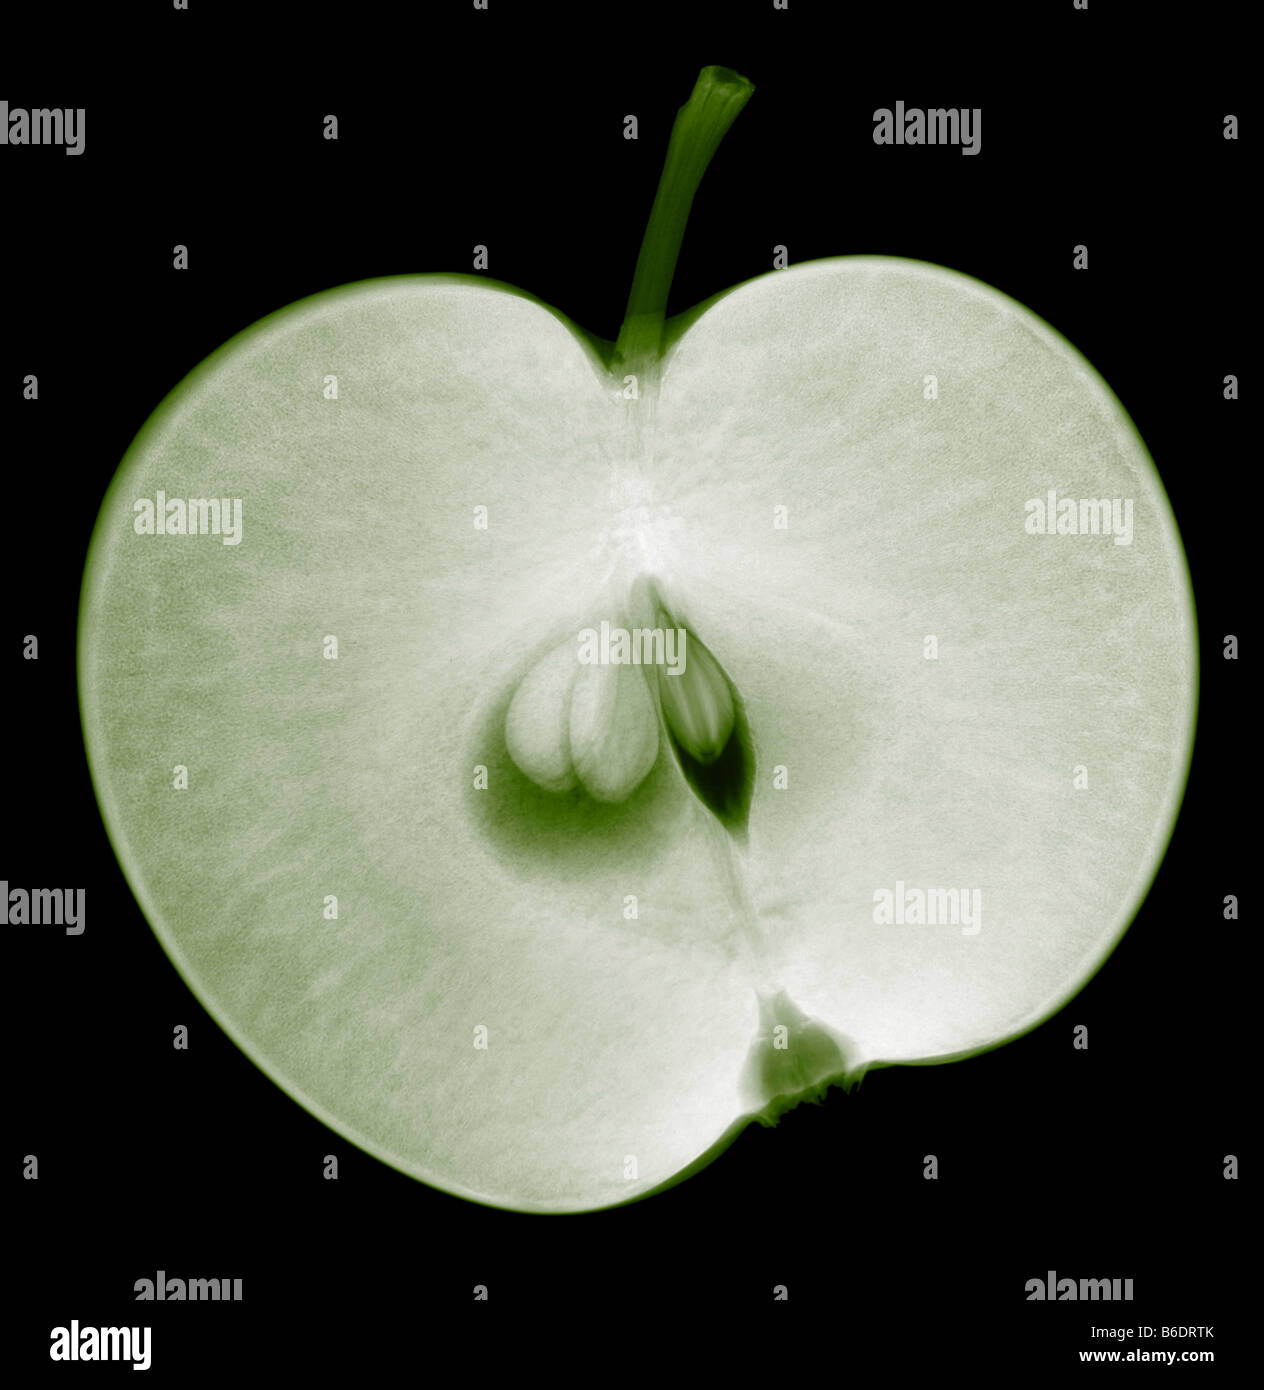 Apple half (Malus sp.). X-ray of an apple sliced in half. At the centre are the pips (seeds)of the fruit. Stock Photo